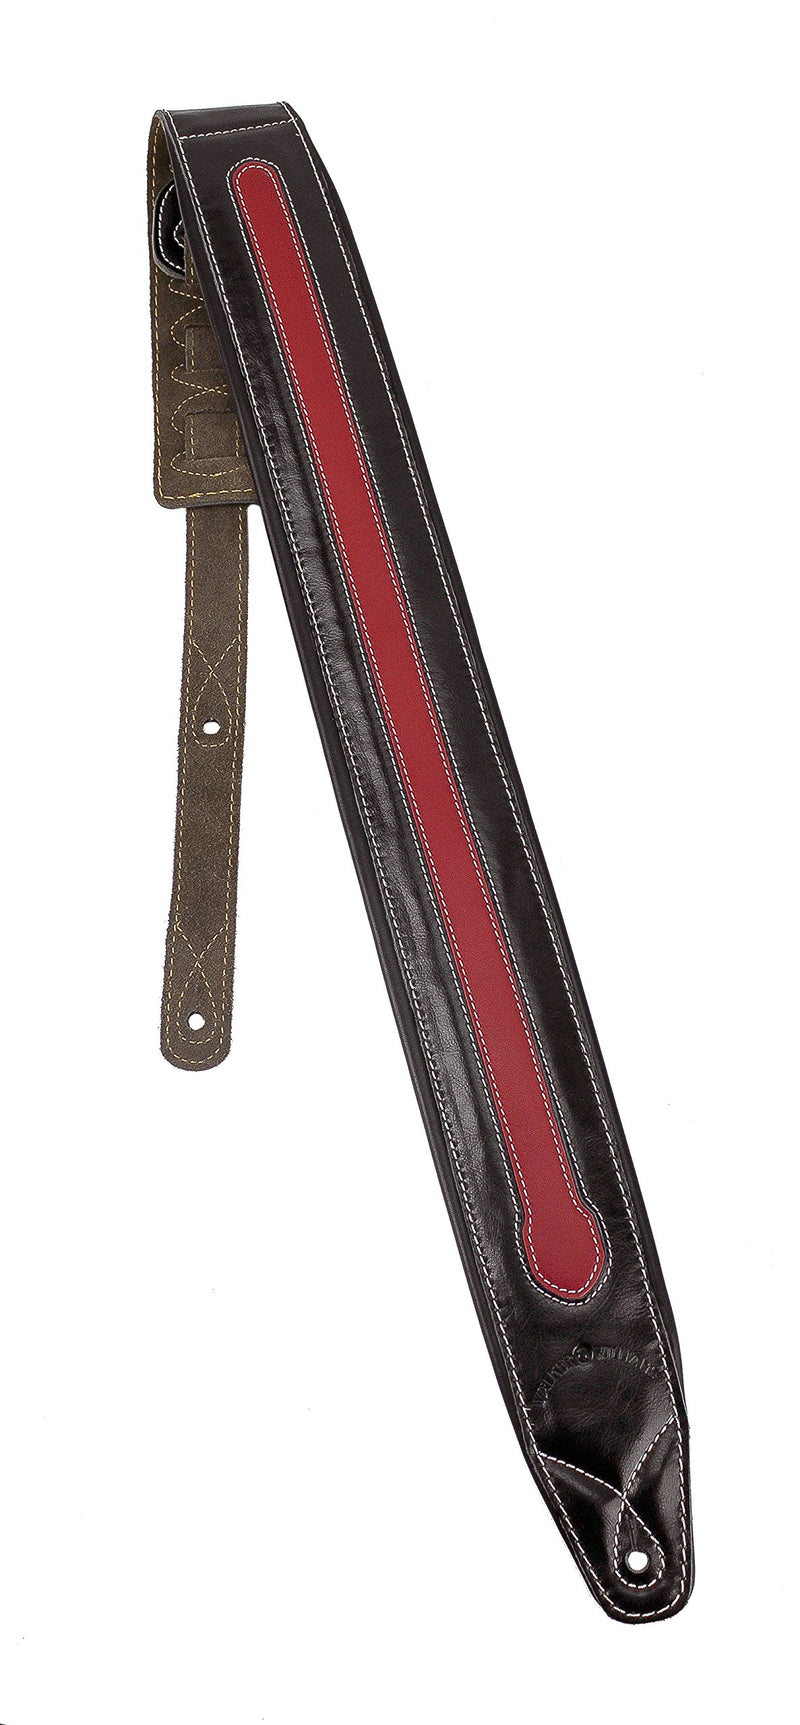 Walker & Williams C-34 Red and Black Super Premium Top Grain Leather Padded Strap 3 1/4" Wide